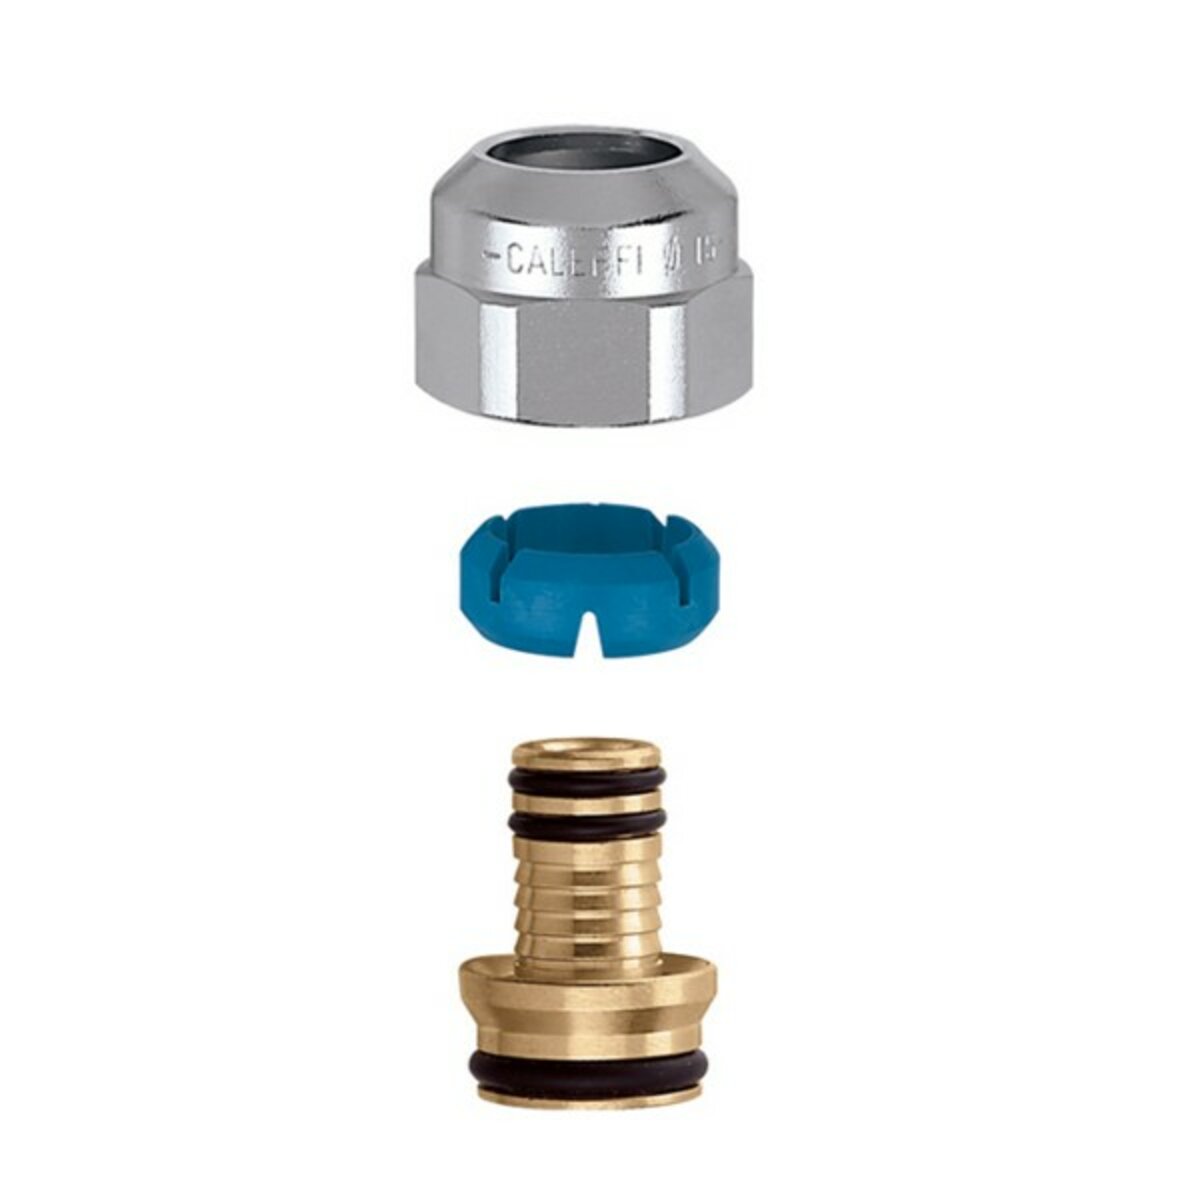 Multilayer fitting series 679 chrome 16x2 - 23 p.1,5 connections for Caleffi valves and lockshields